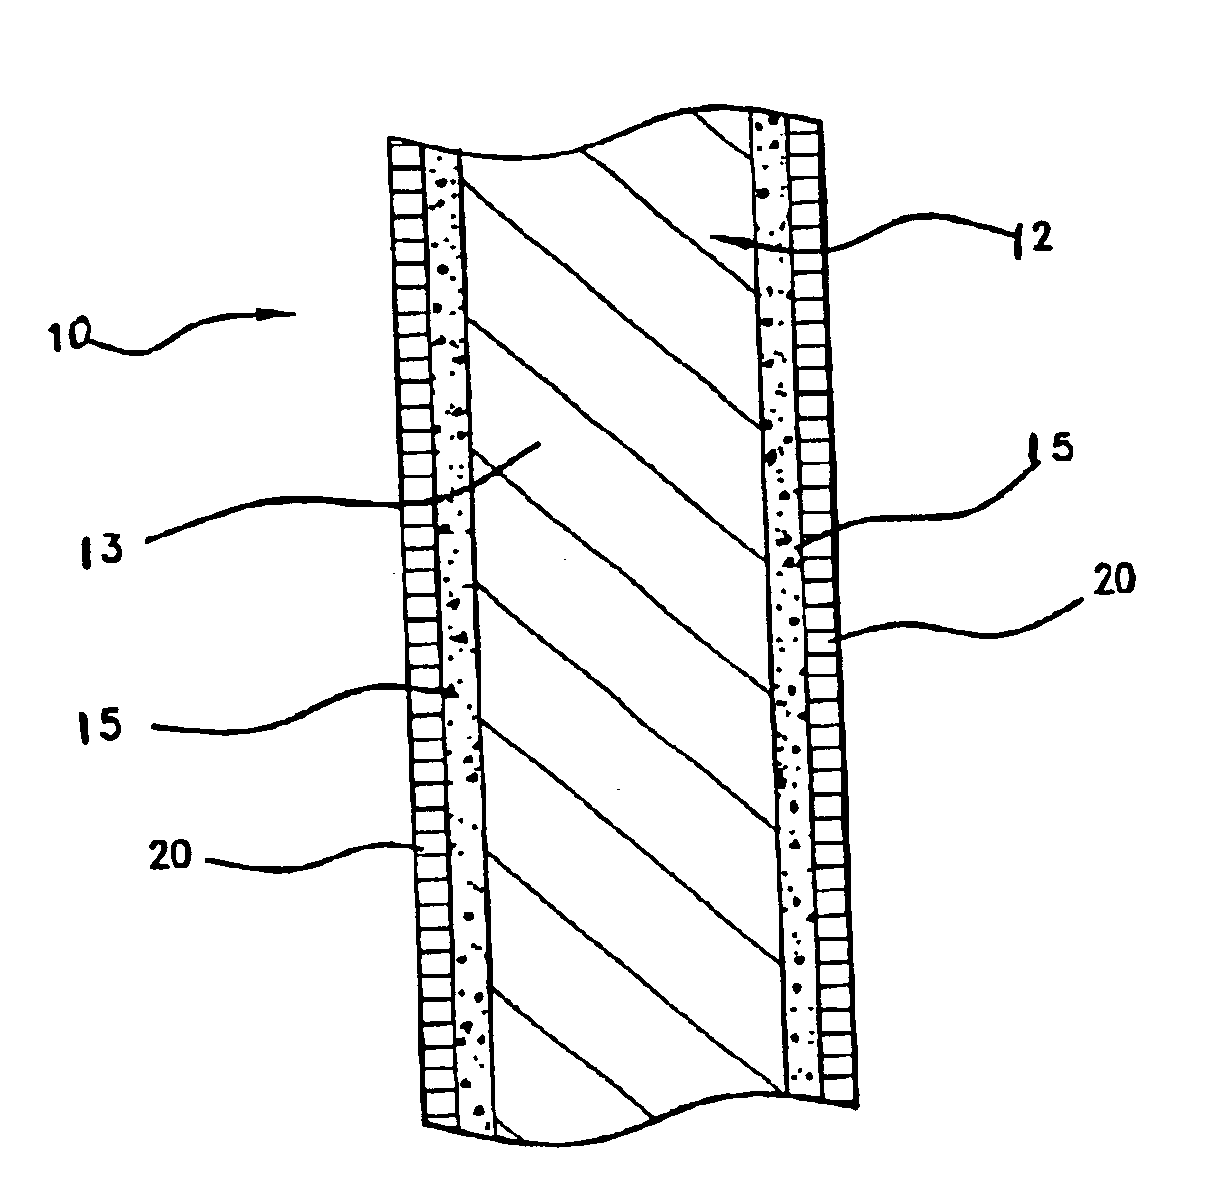 Medical devices incorporating deuterated rapamycin for controlled delivery thereof